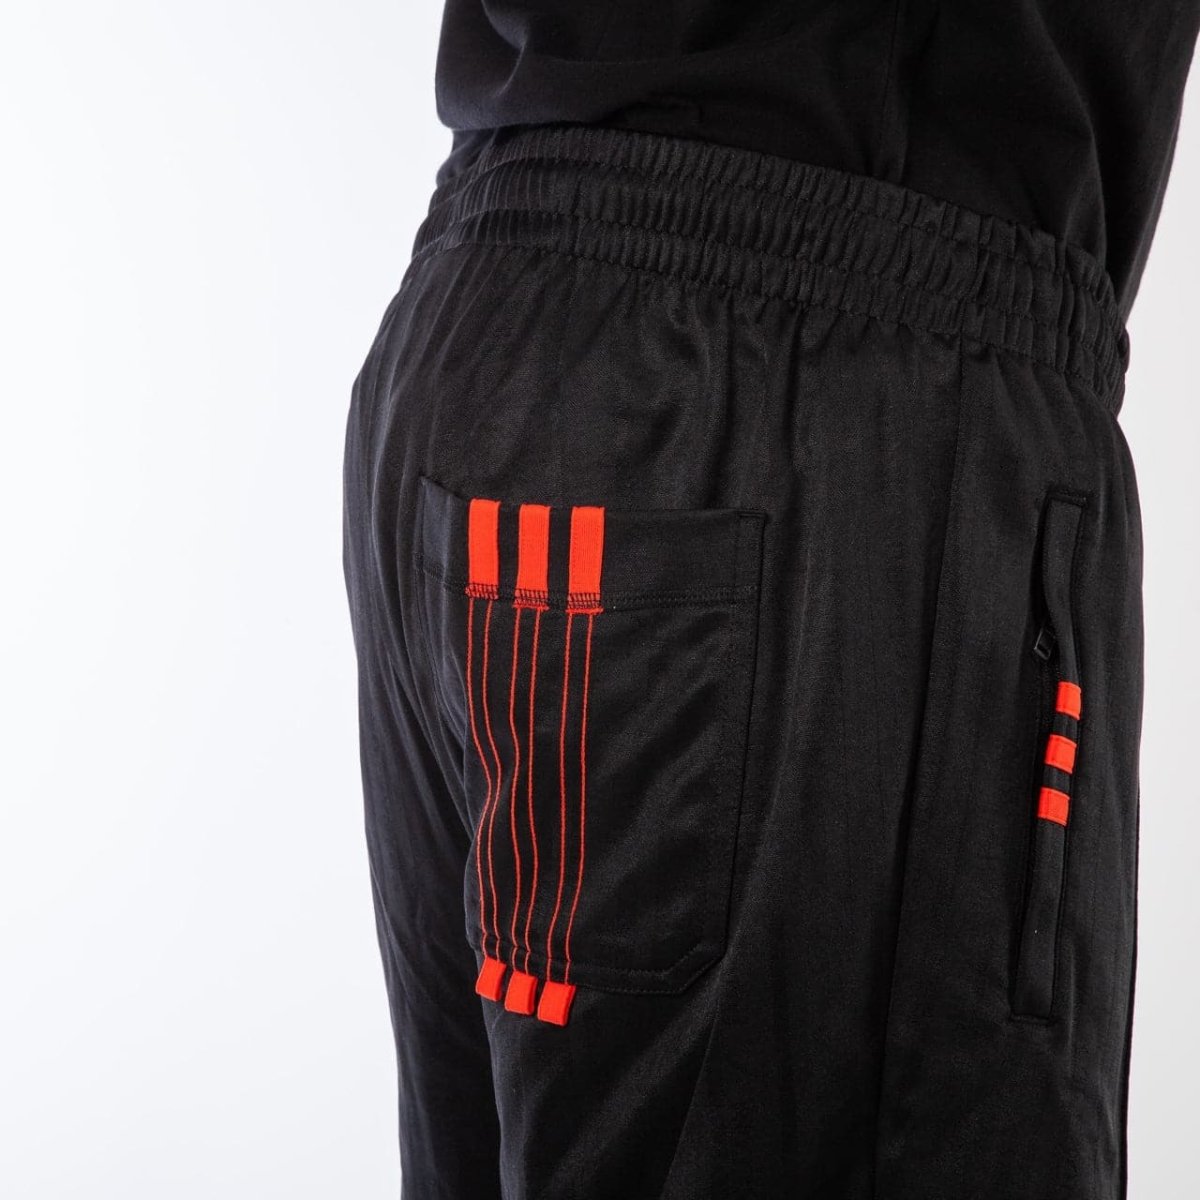 adidas by Alexander Wang Tracksuit Pants (schwarz / rot)  - Allike Store